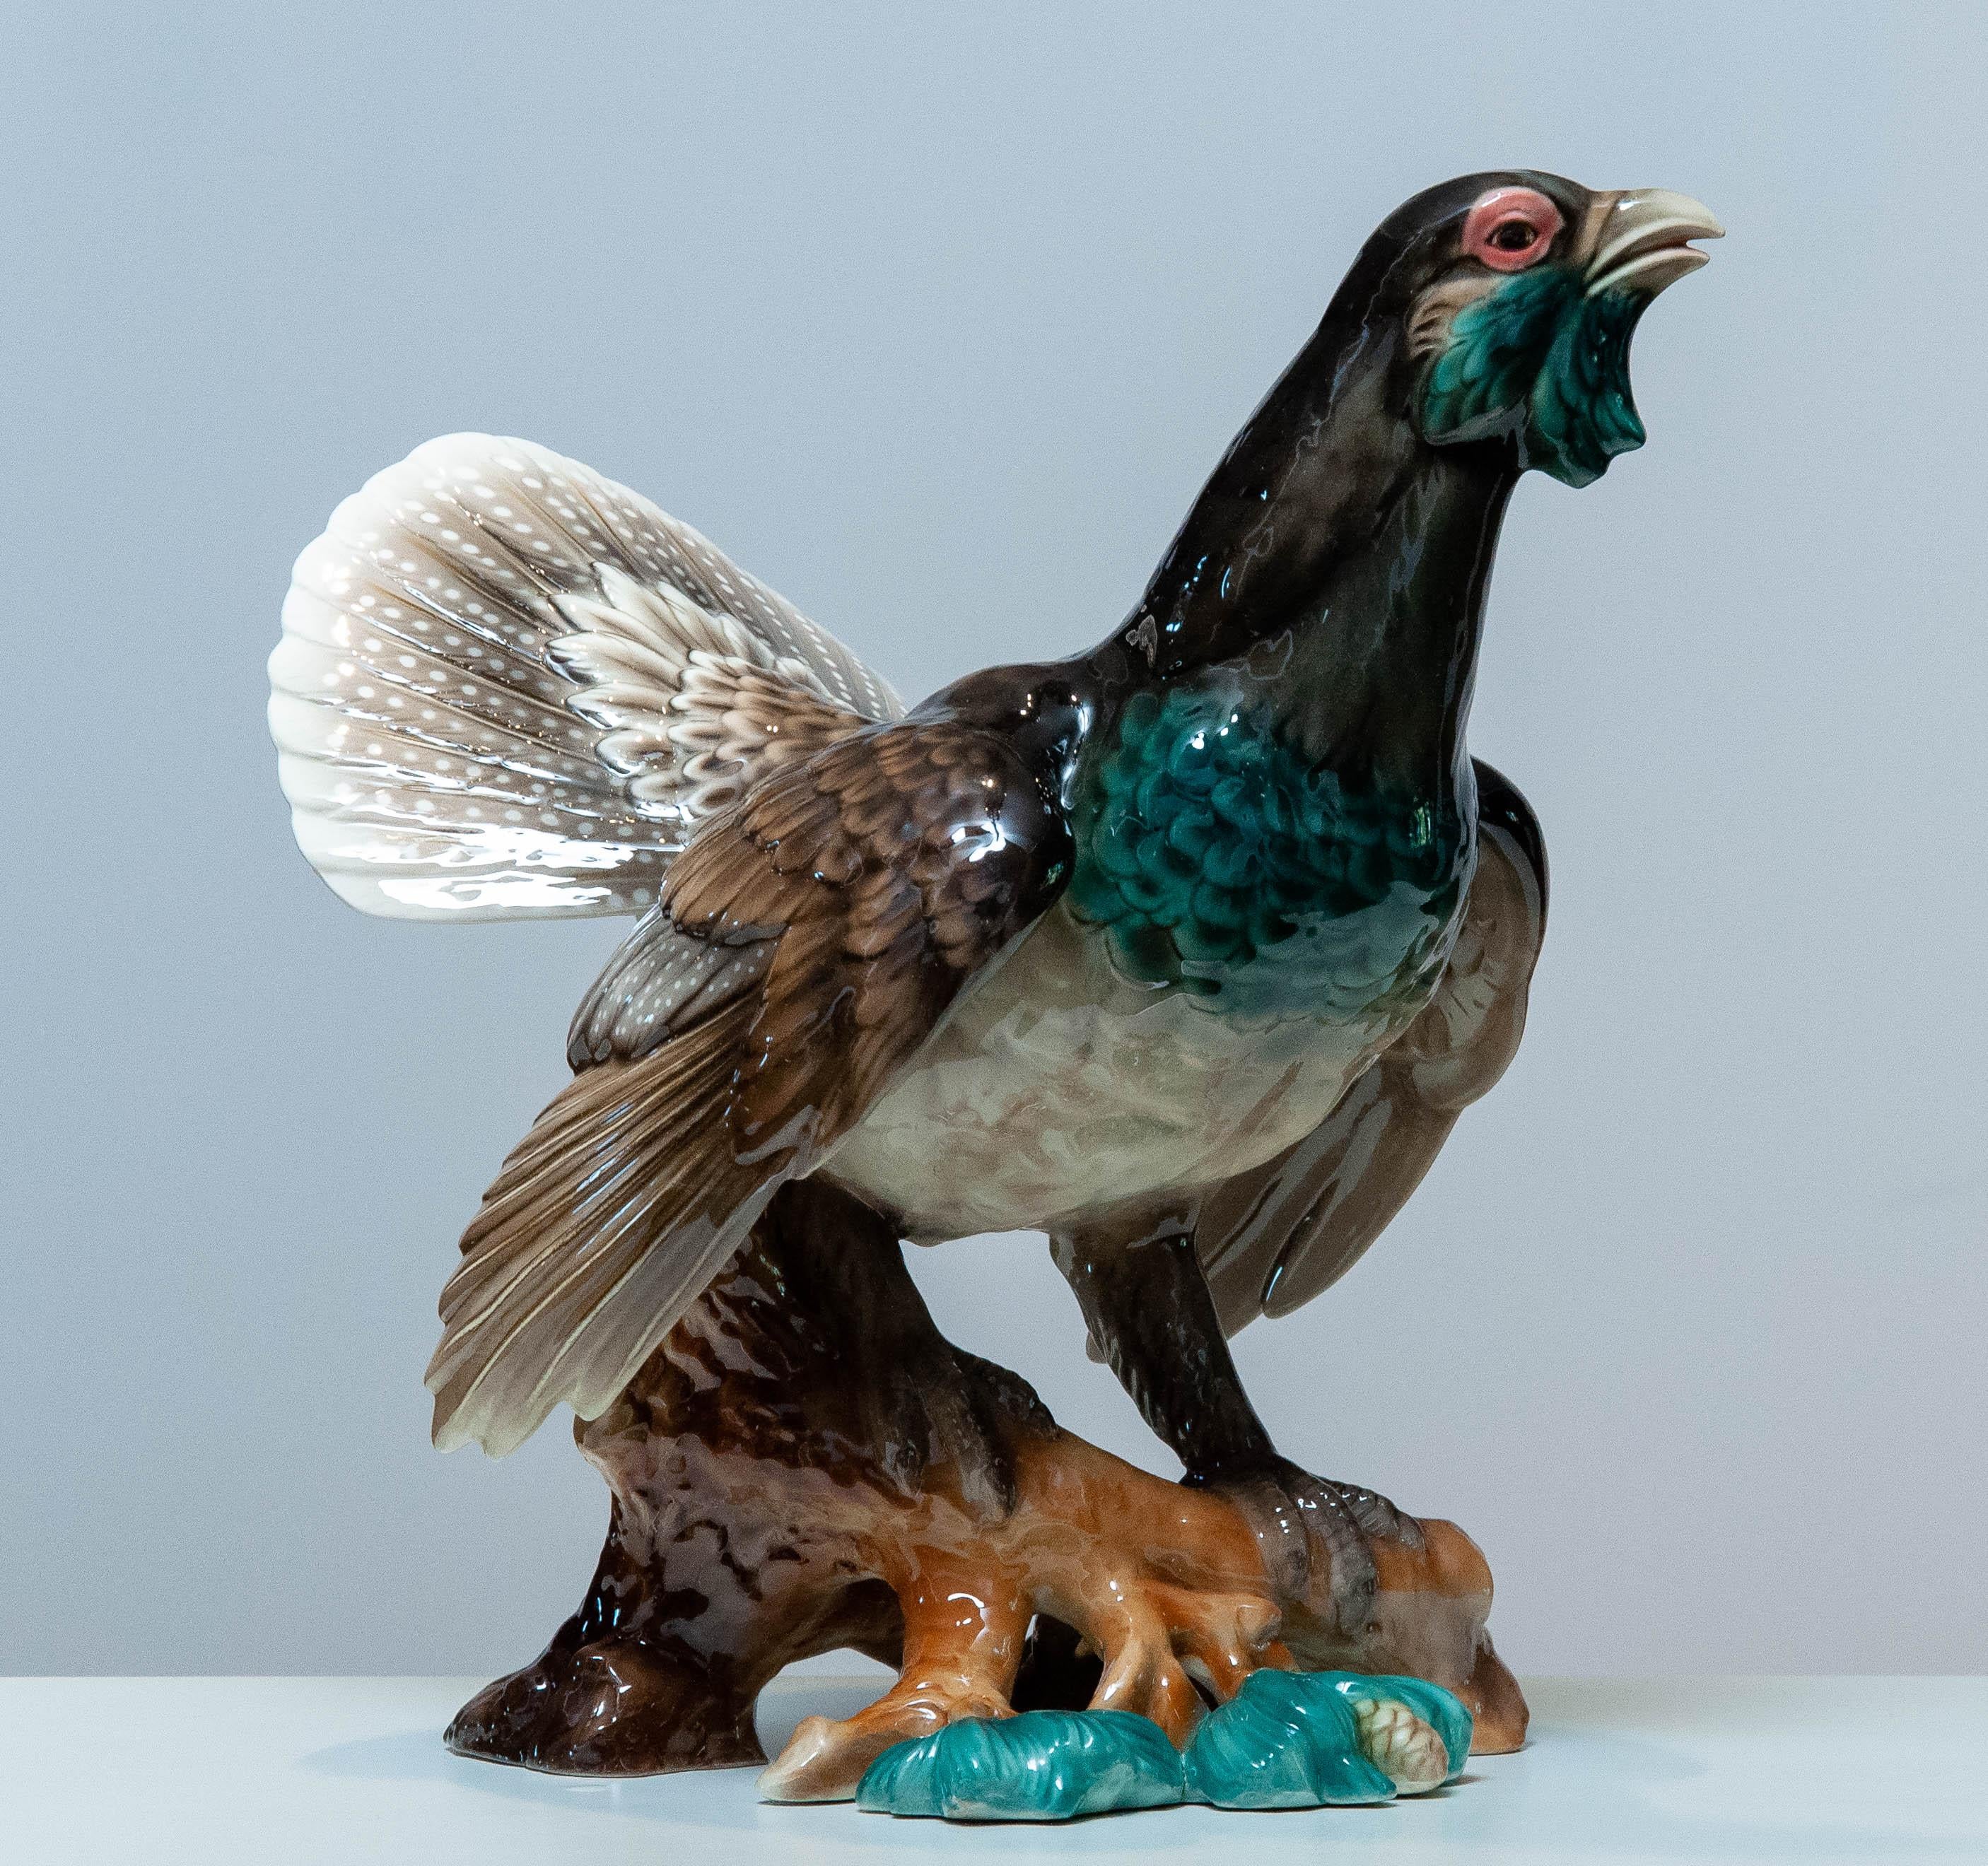 Extremely rare, extra large, porcelain pheasant designed and made by Rudolf Chocola at Keramos in Vienna Austria in the 1940's. This big pheasant is marked and numbered: 2536.
In absolutely mint condition.
